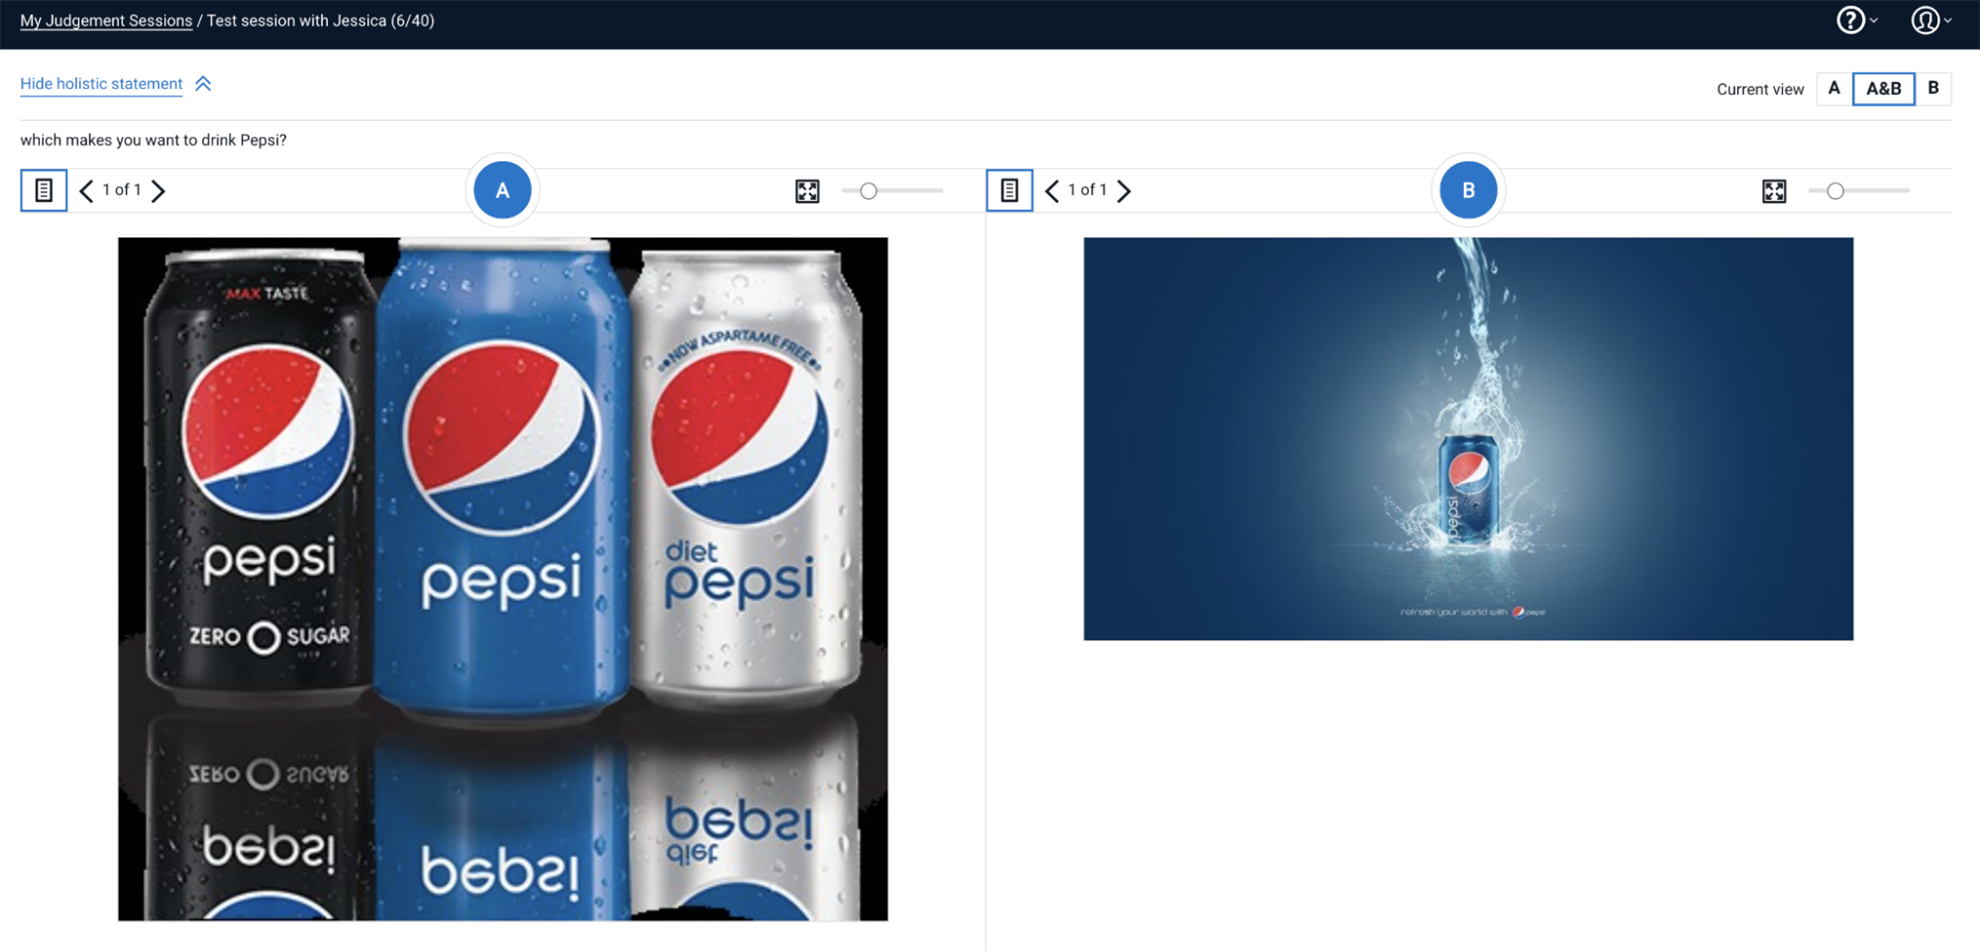 Pepsi images in the server